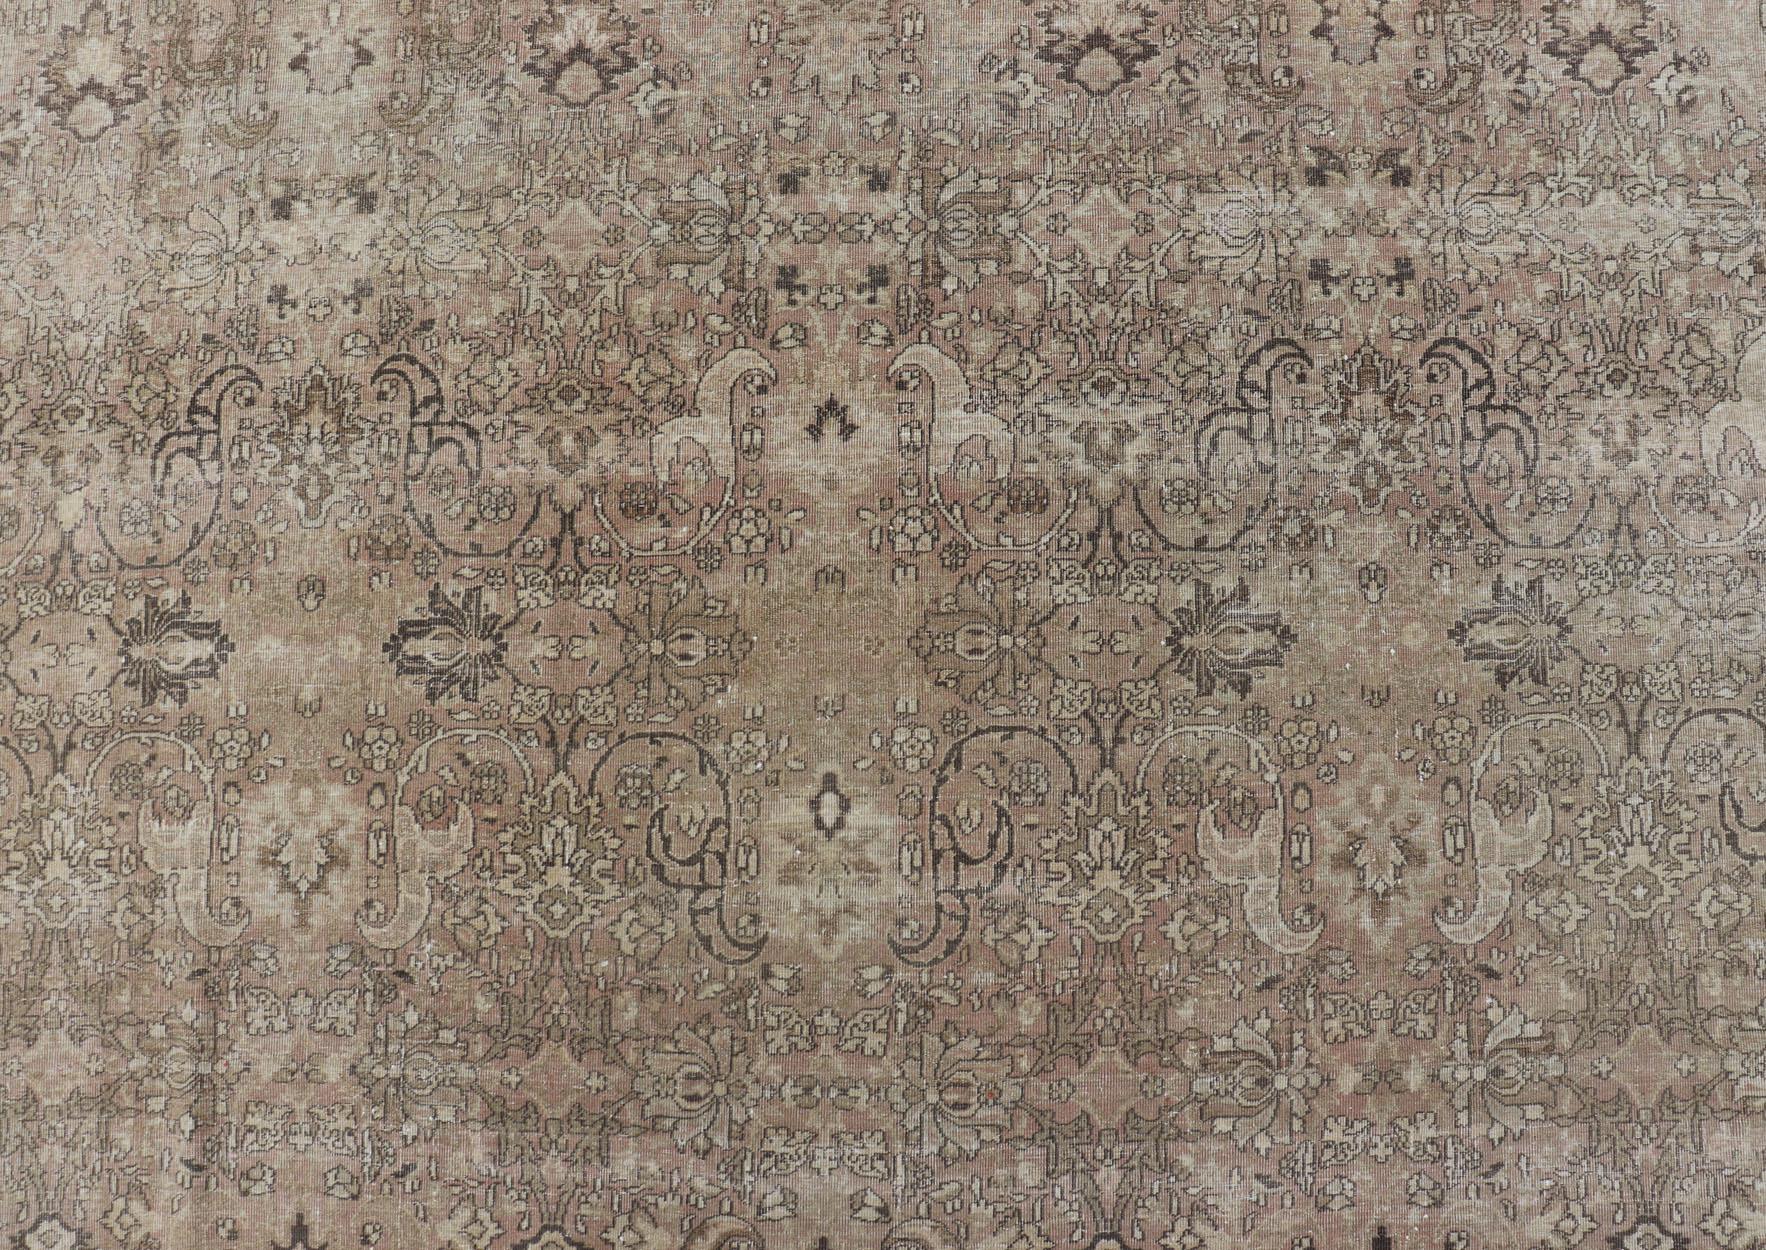 Large Antique Turkish Sivas Rug with Floral Design in Earthy Neutral Tones. Country of Origin: Turkey; Type: Sivas; Design: Floral, All-Over, Floral Trellis; Keivan Woven Arts: rug /R20-0807. 

Measures: 11'6 x 17'2 

In this early 20th century